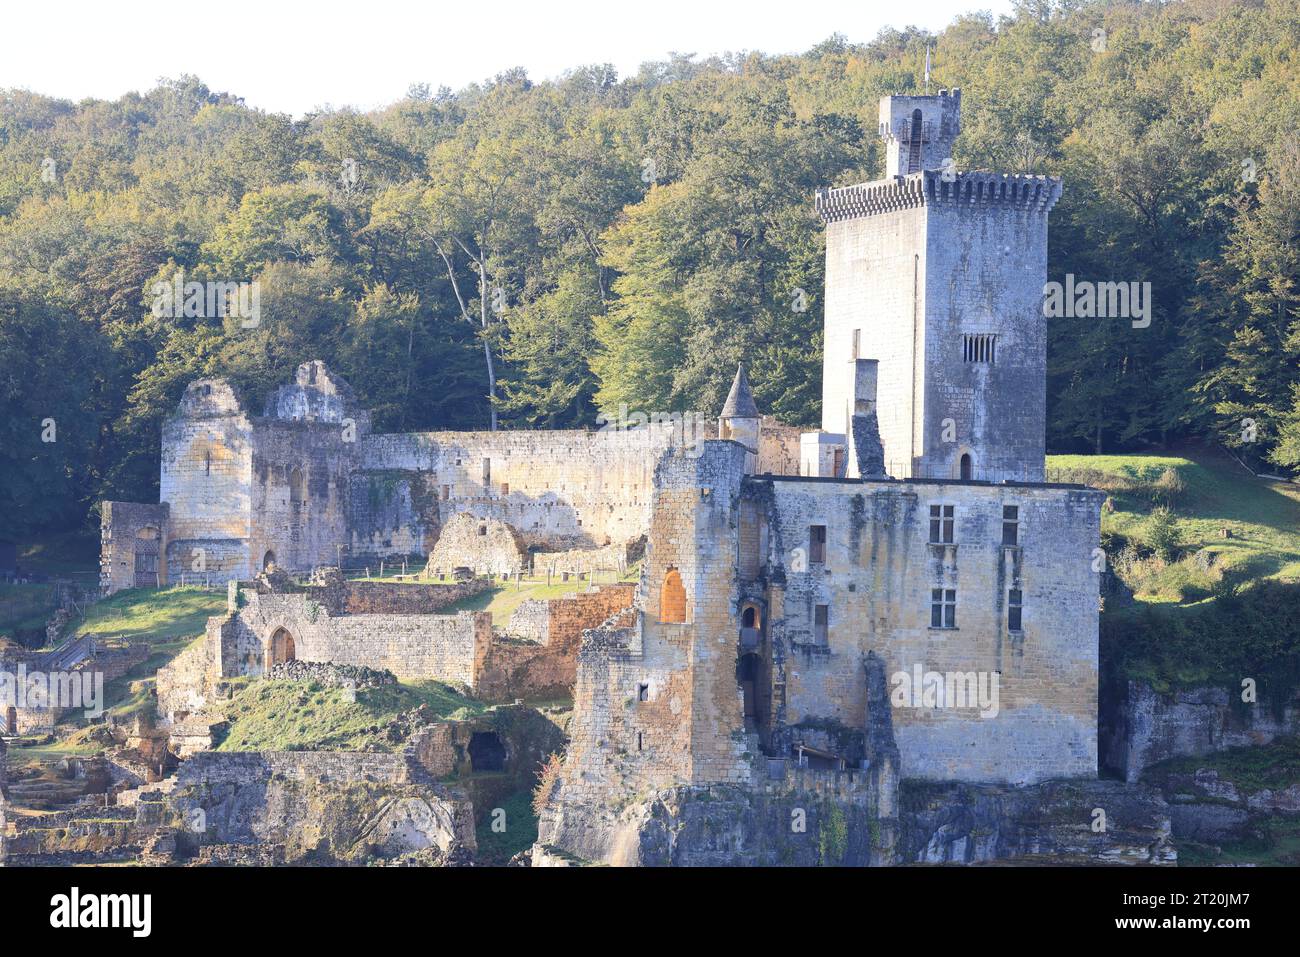 Ruins of the Château de Commarque, an ancient fortified castle, whose origin dates back to the 12th century, which stands in the French commune of Les Stock Photo